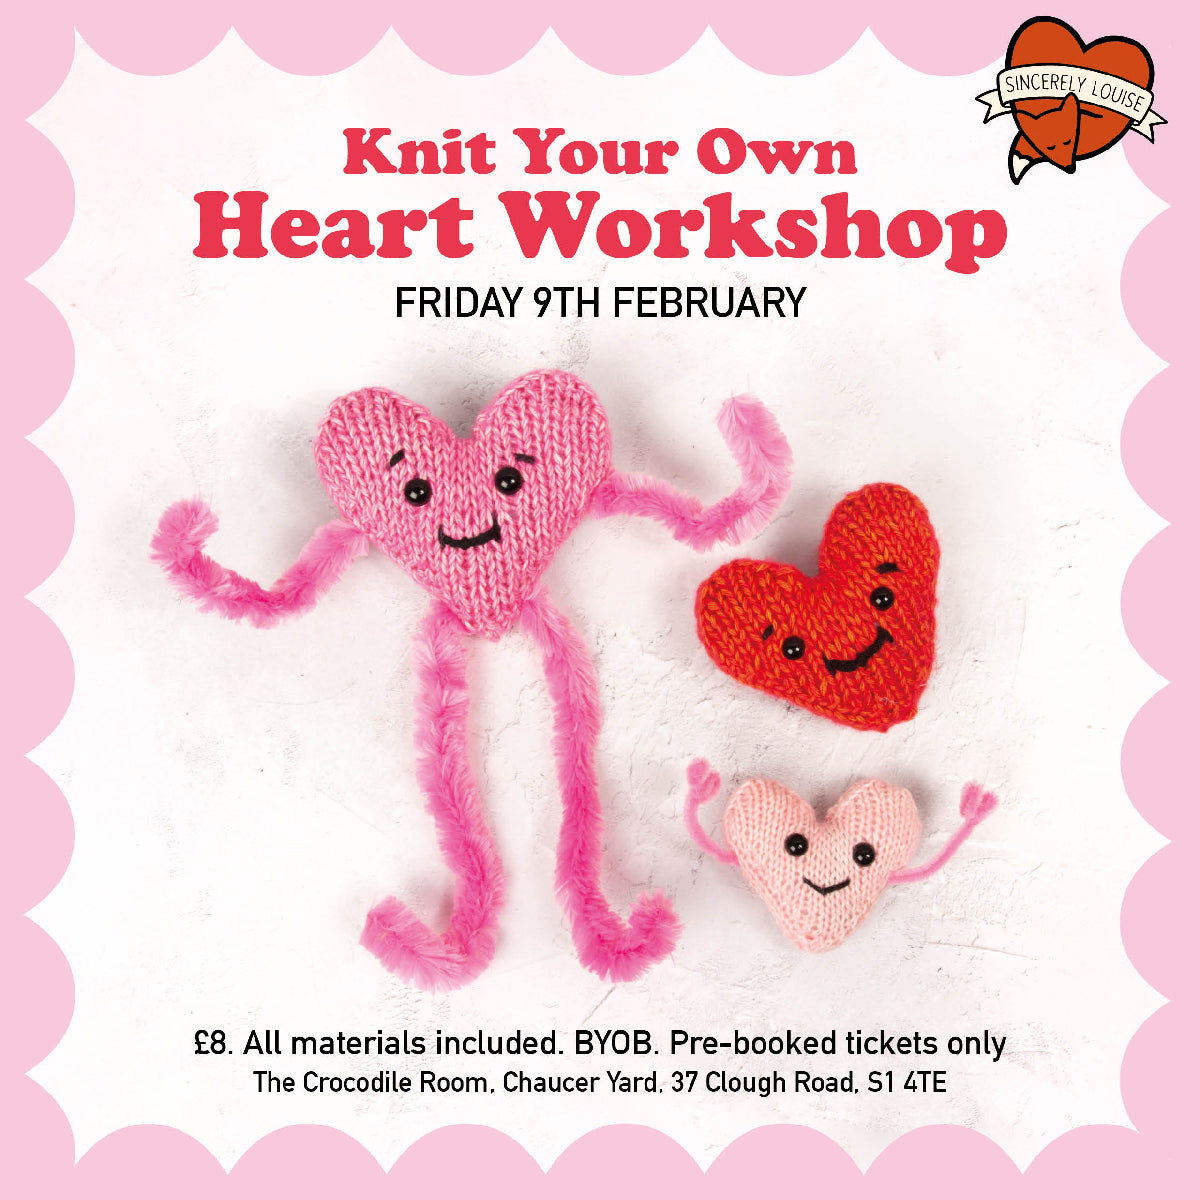 Knit Your Own Heart Workshop - Friday 9th February